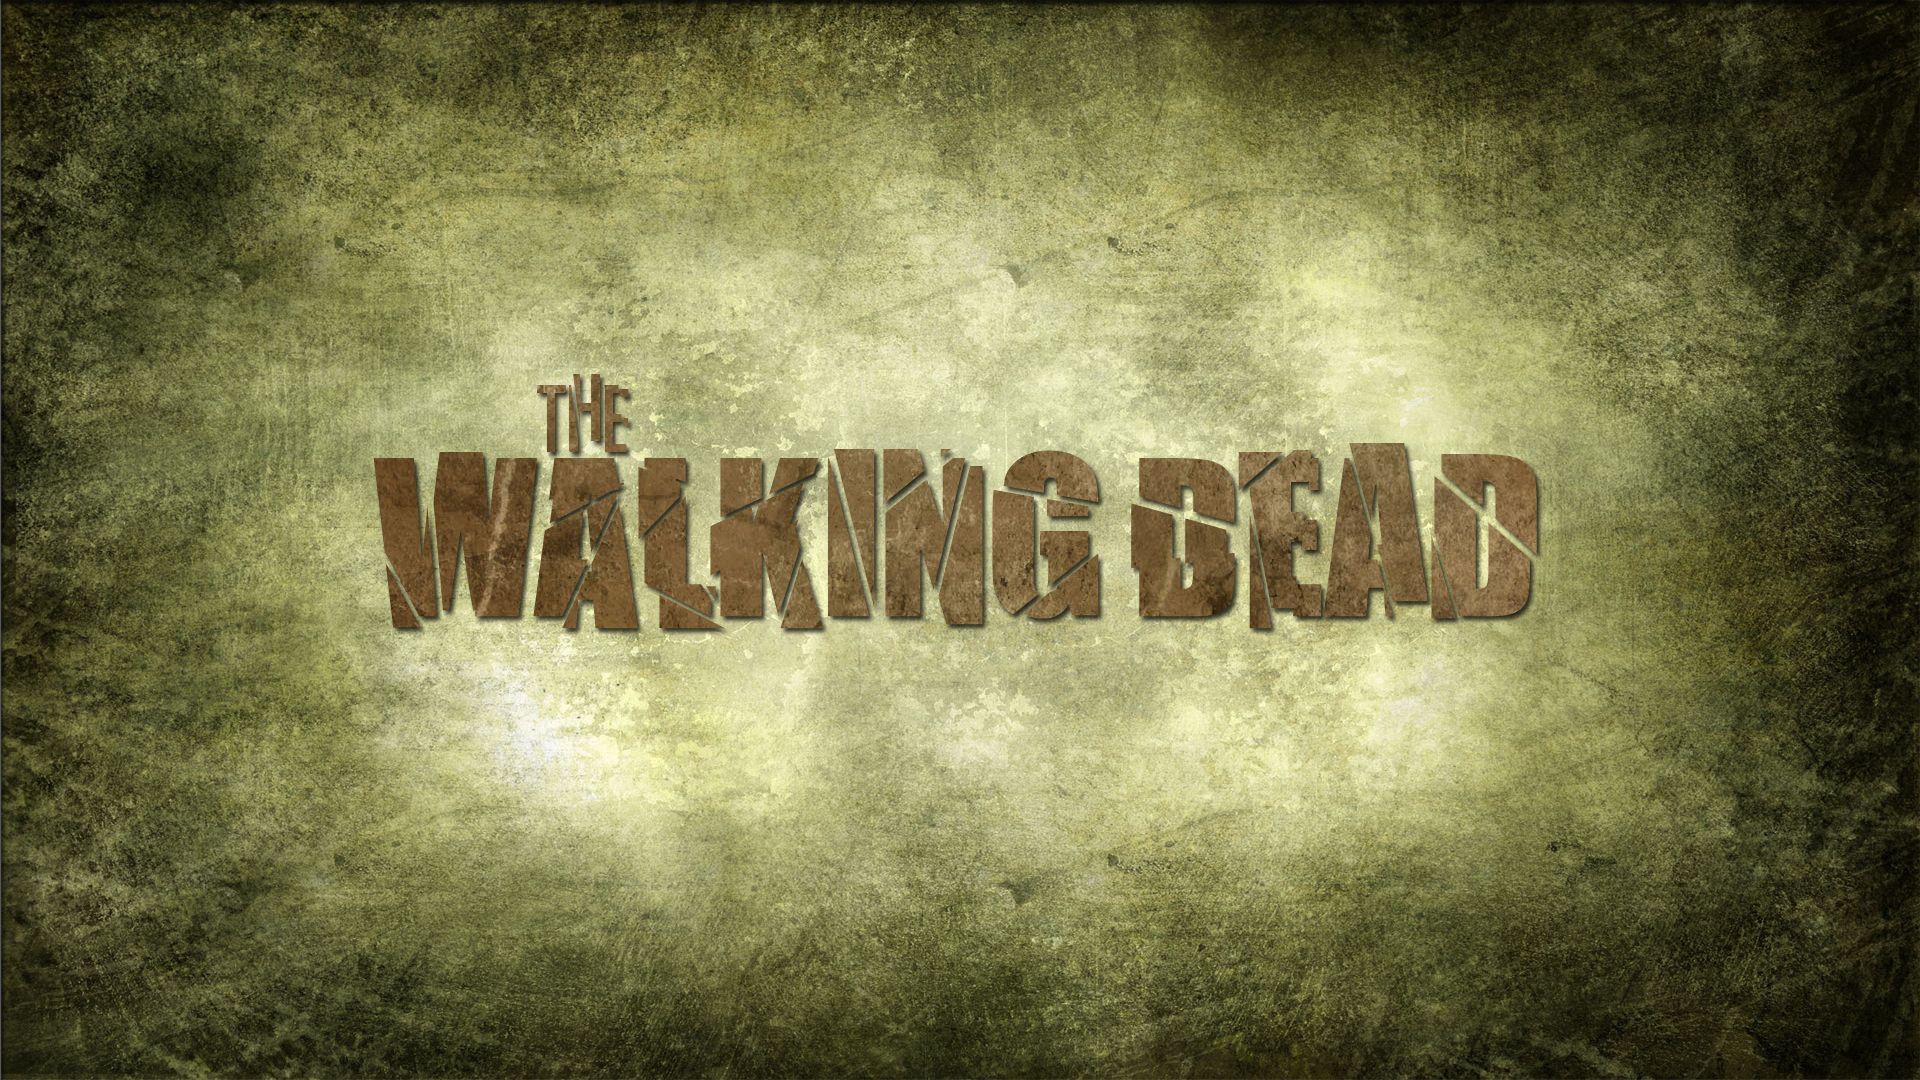 The Walking Dead Background Film wallpaper by springbackground2015 ...